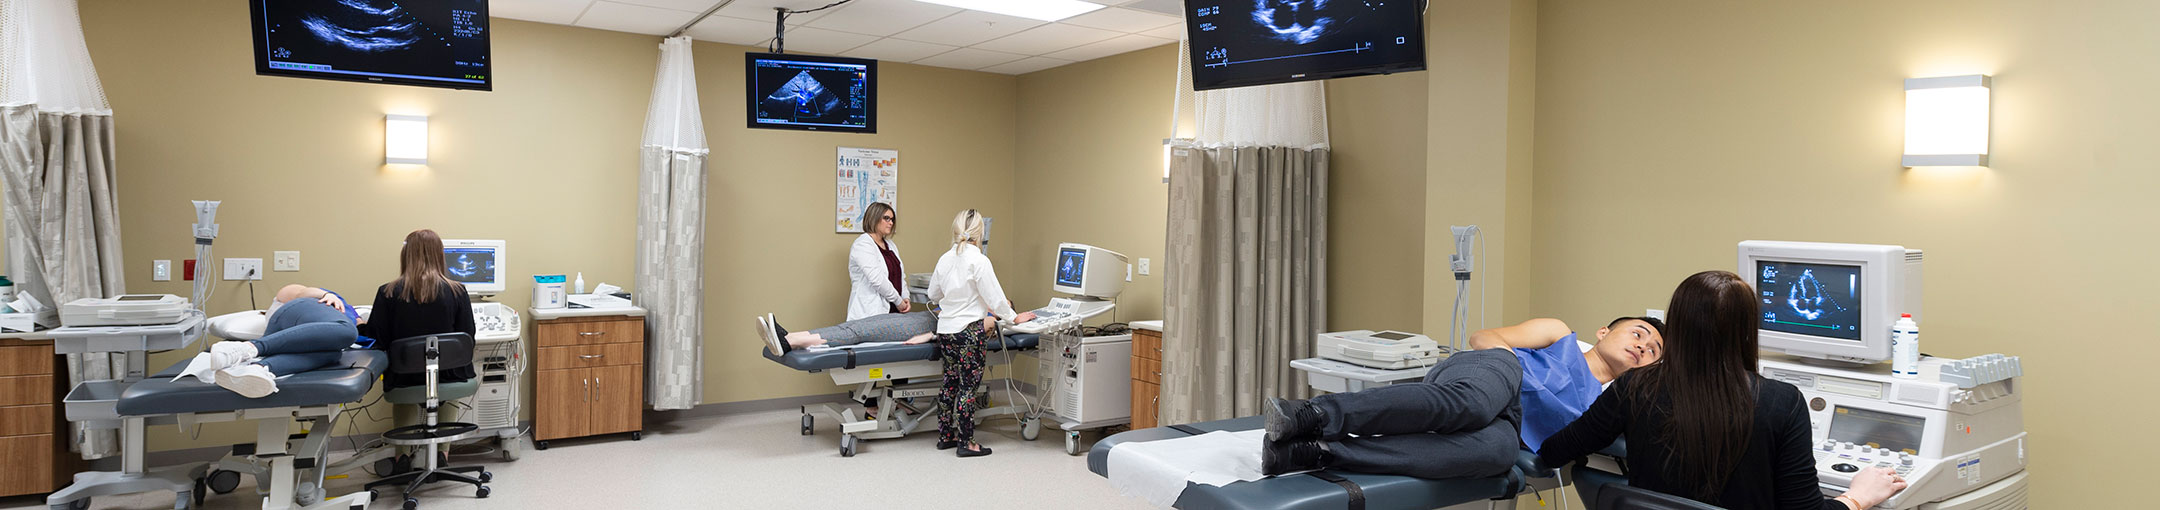 a hospital room with 3 patients all using ultrasound scanners with TVs on the wall showing the scan imagery